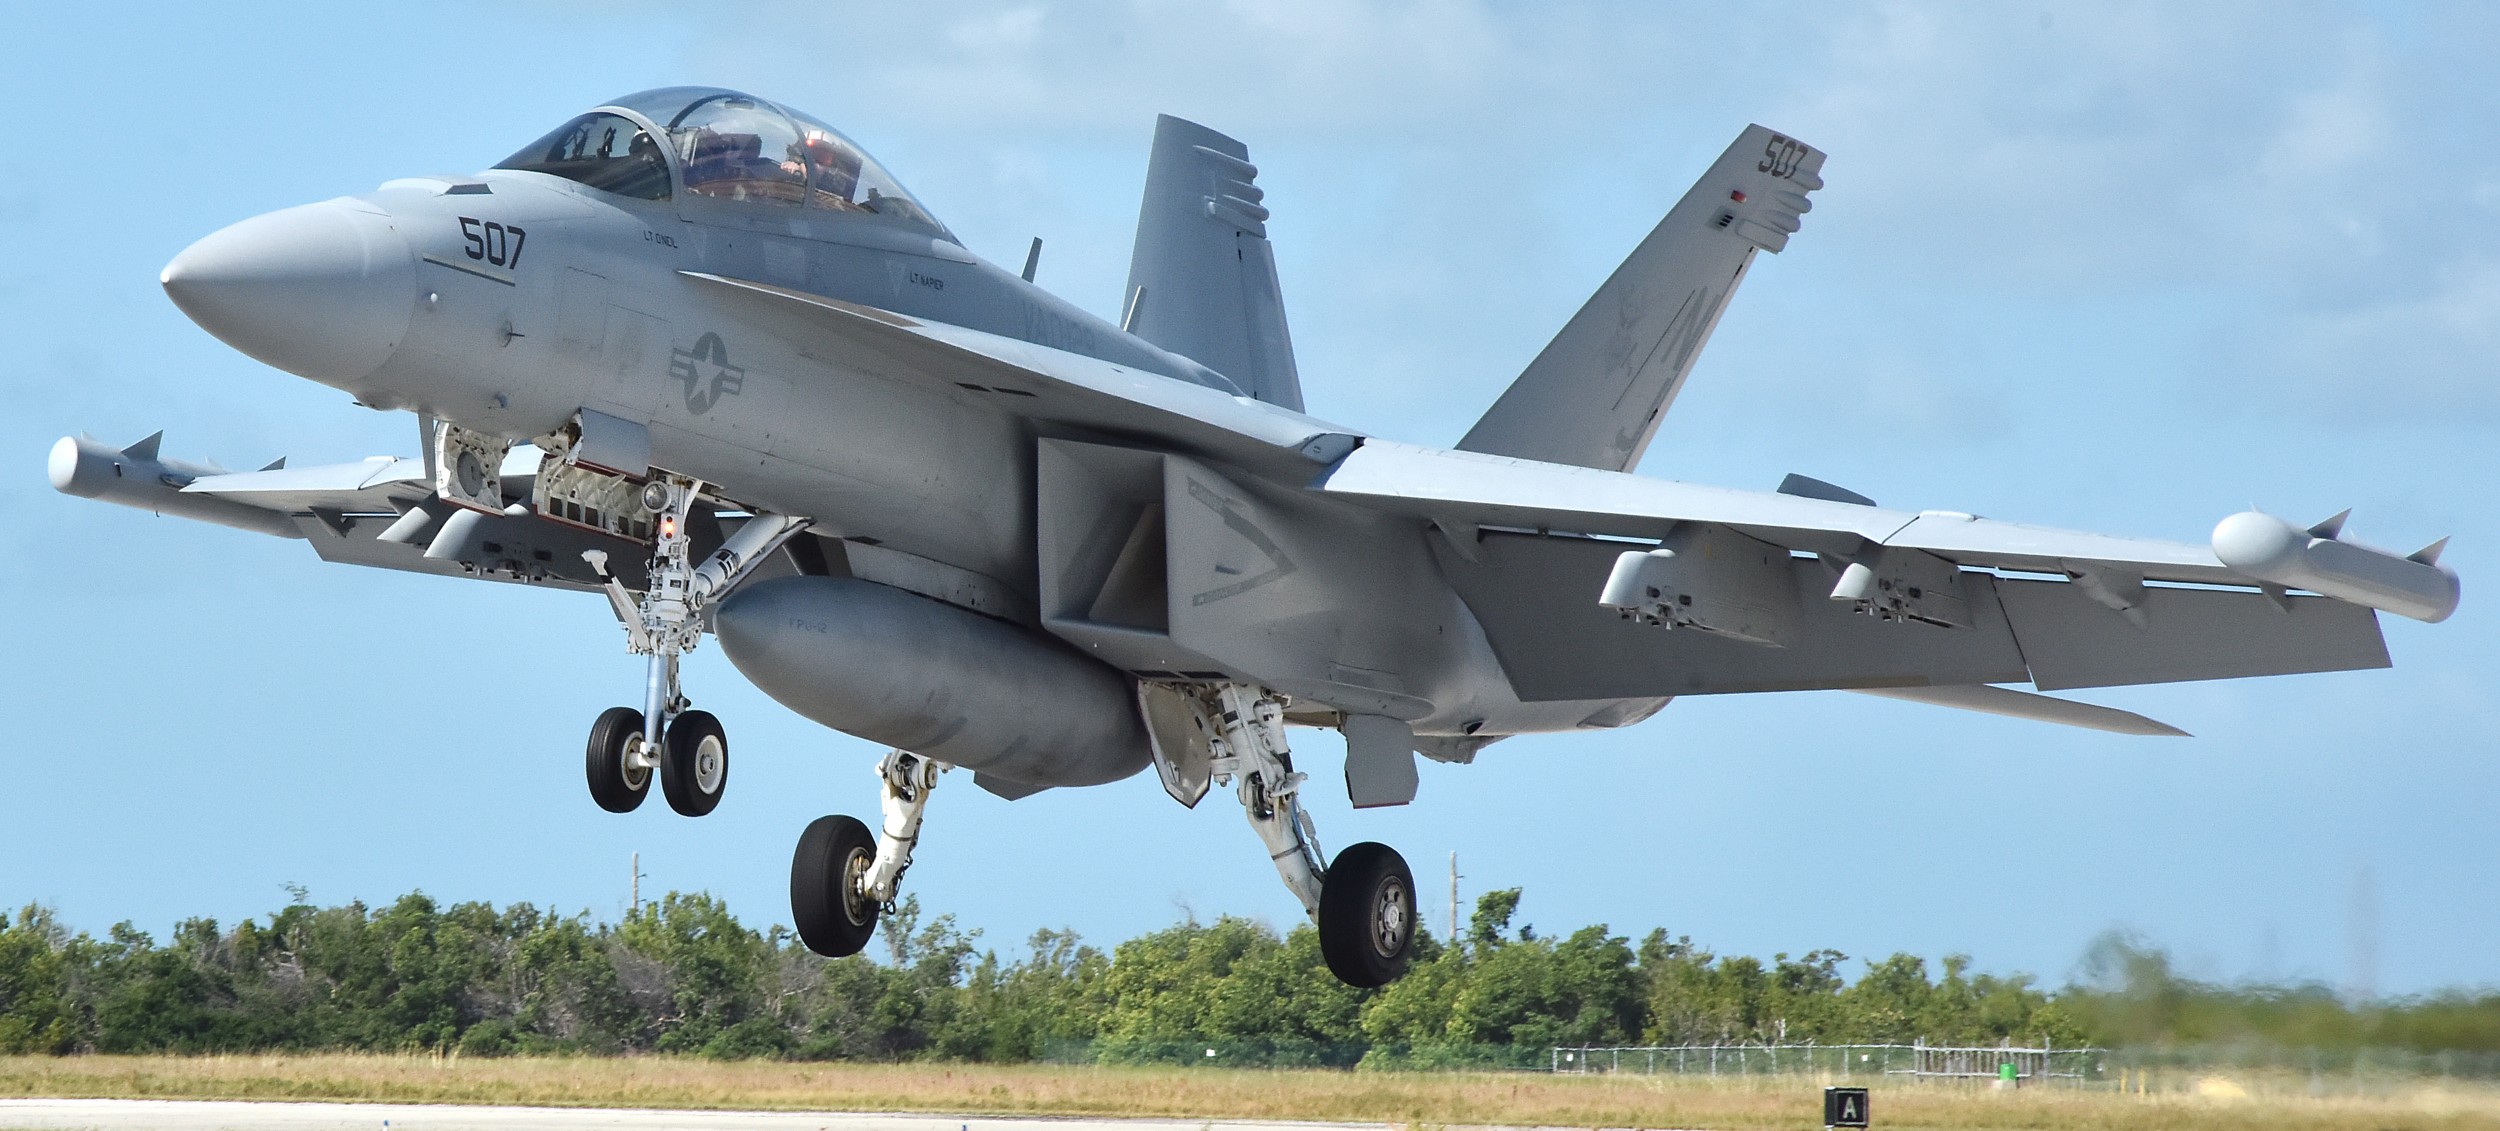 vaq-129 vikings electronic attack squadron fleet replacement frs us navy ea-18g growler 81 nas key west boca chica field